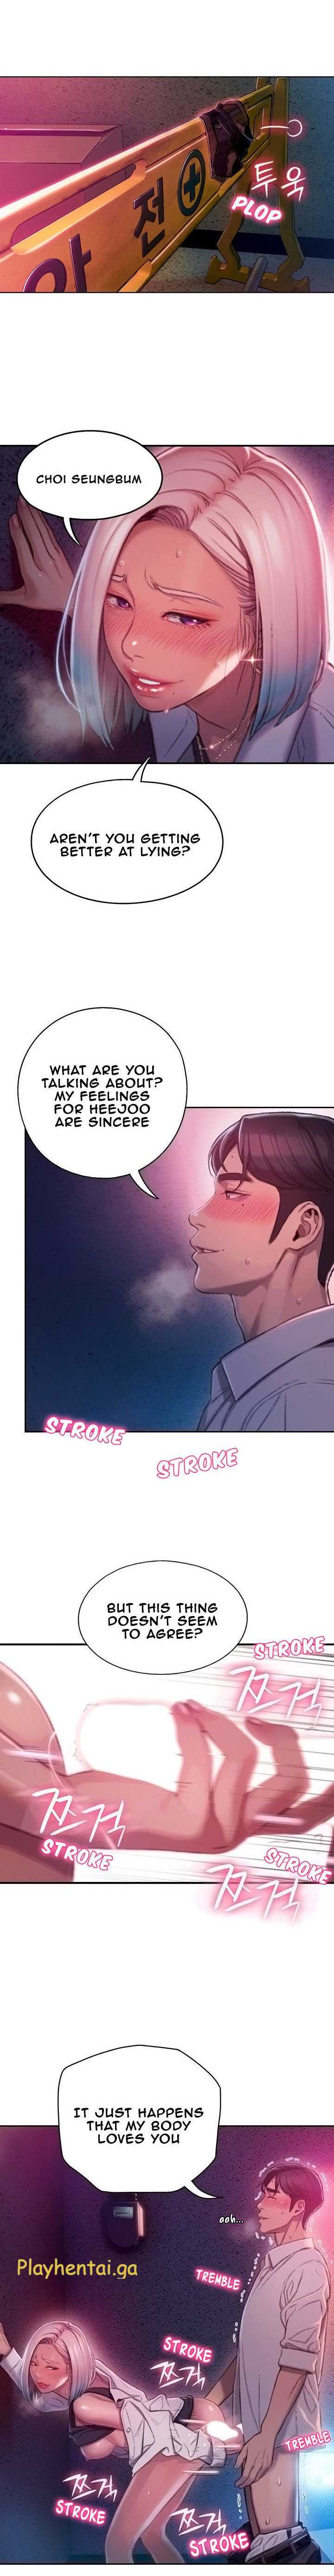 [Park Hyeongjun] Love Limit Exceeded (01-09) (Ongoing) - Page 20